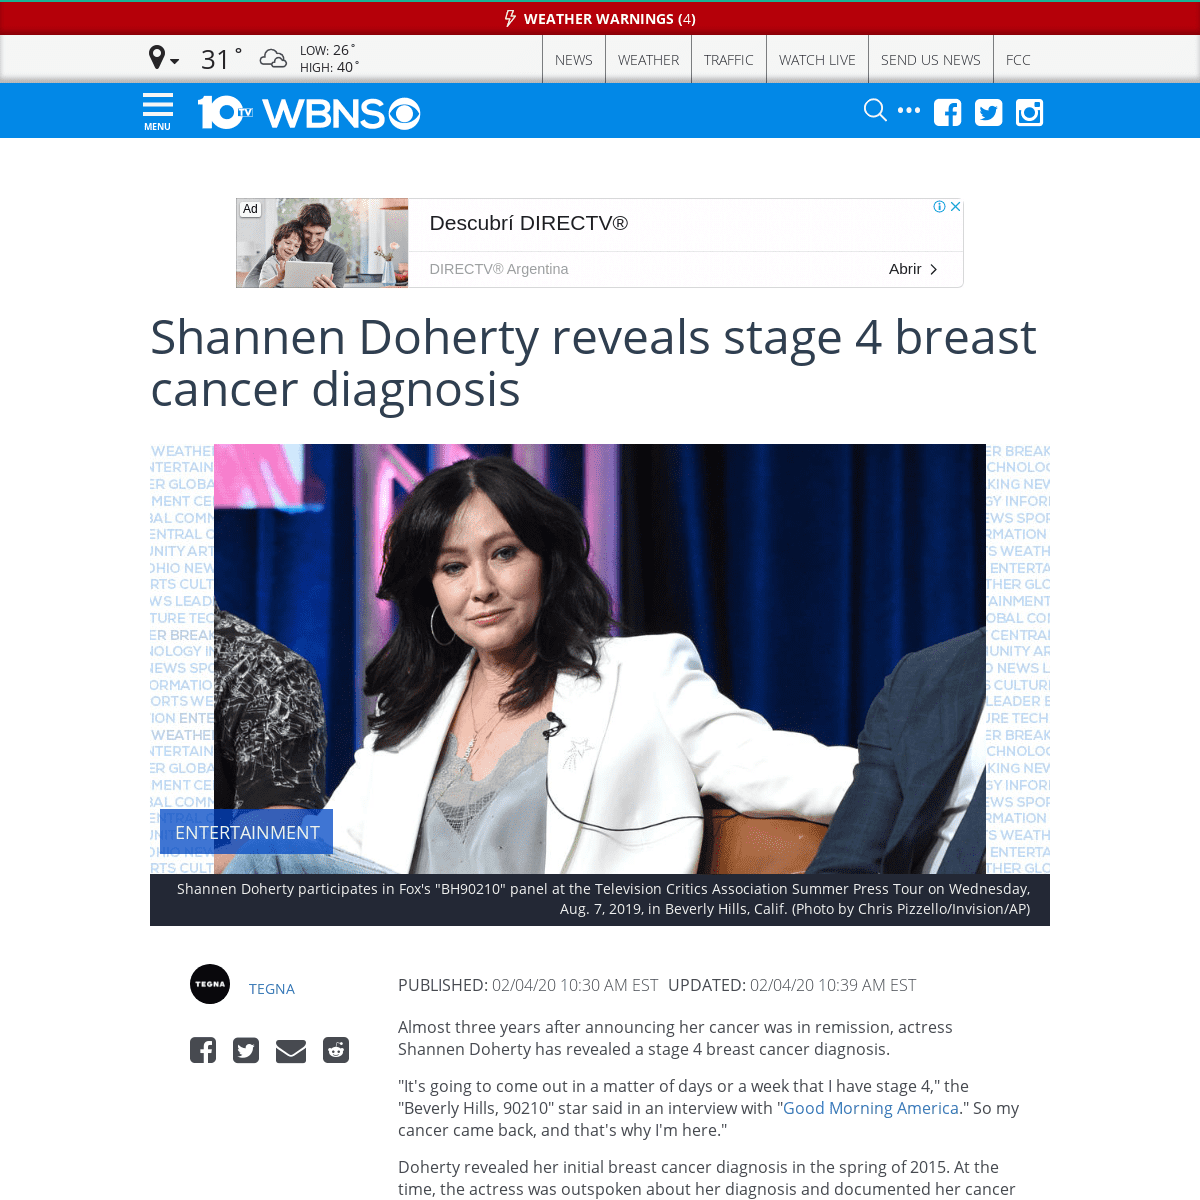 A complete backup of www.10tv.com/article/shannen-doherty-reveals-stage-4-breast-cancer-diagnosis-2020-feb